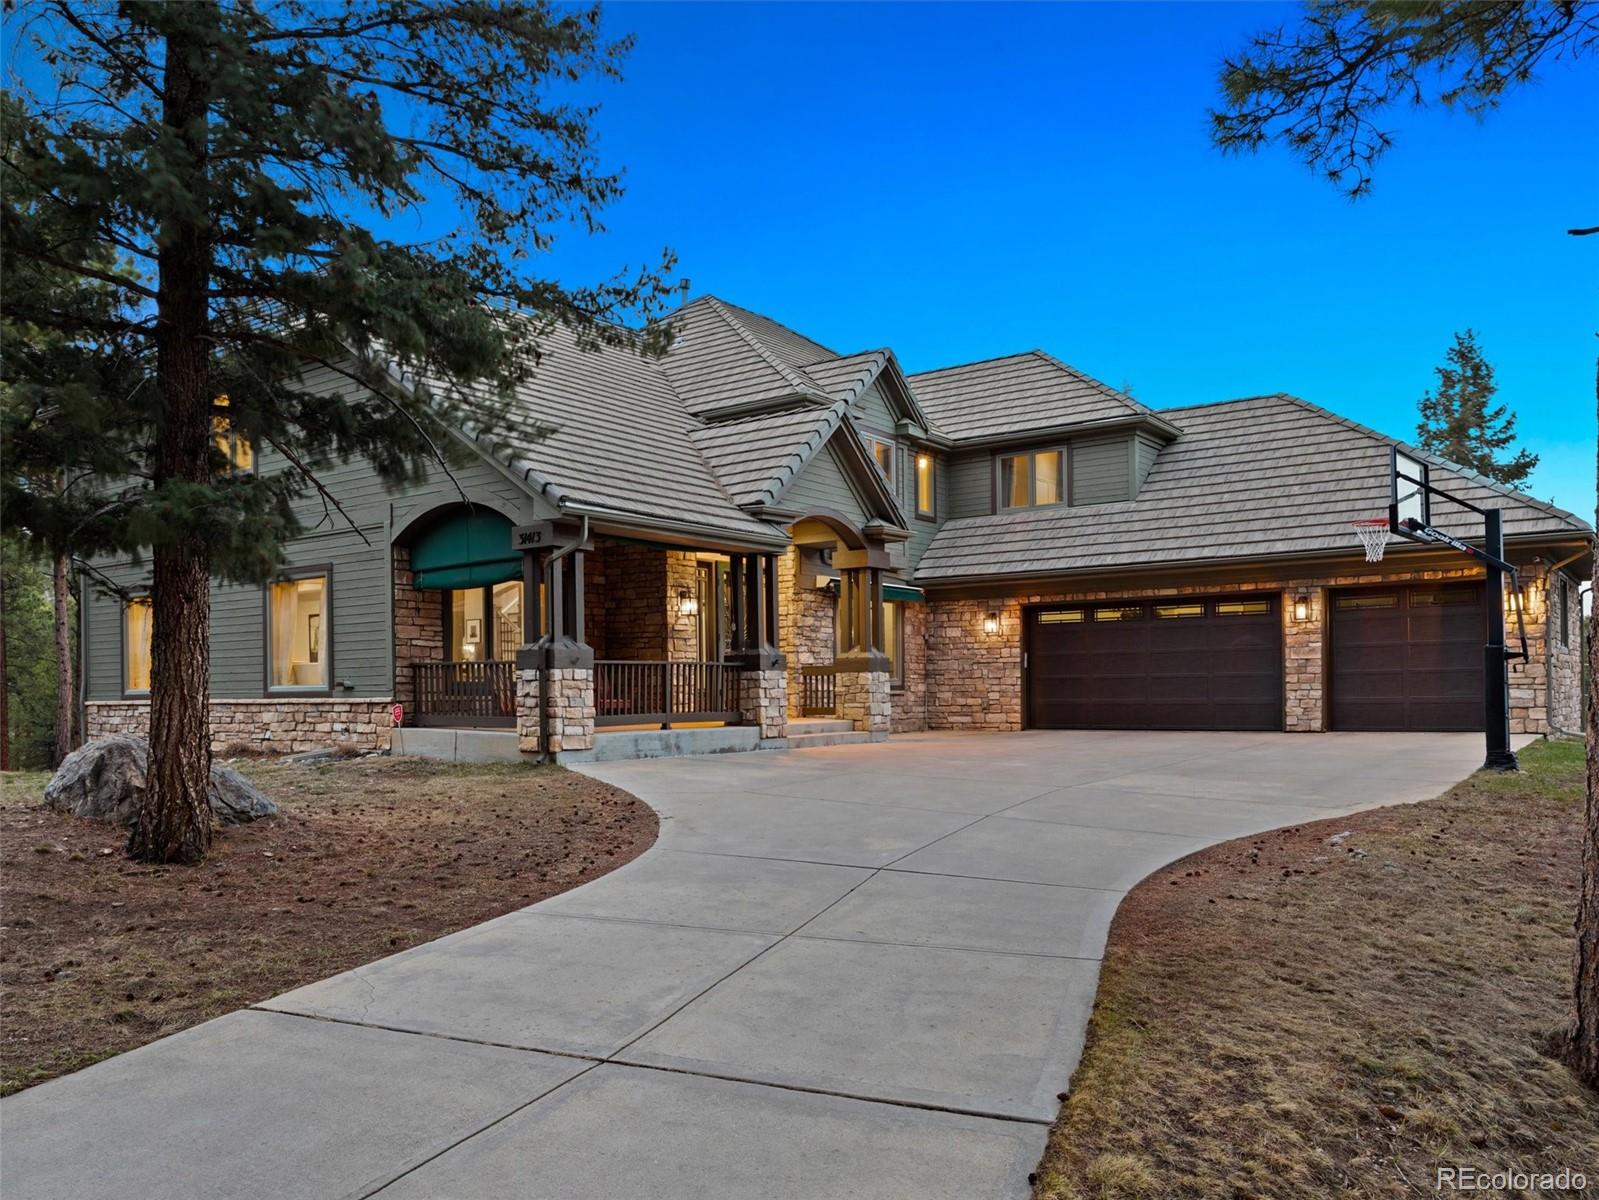 Property: 31413 Morning Star Drive,Evergreen, CO